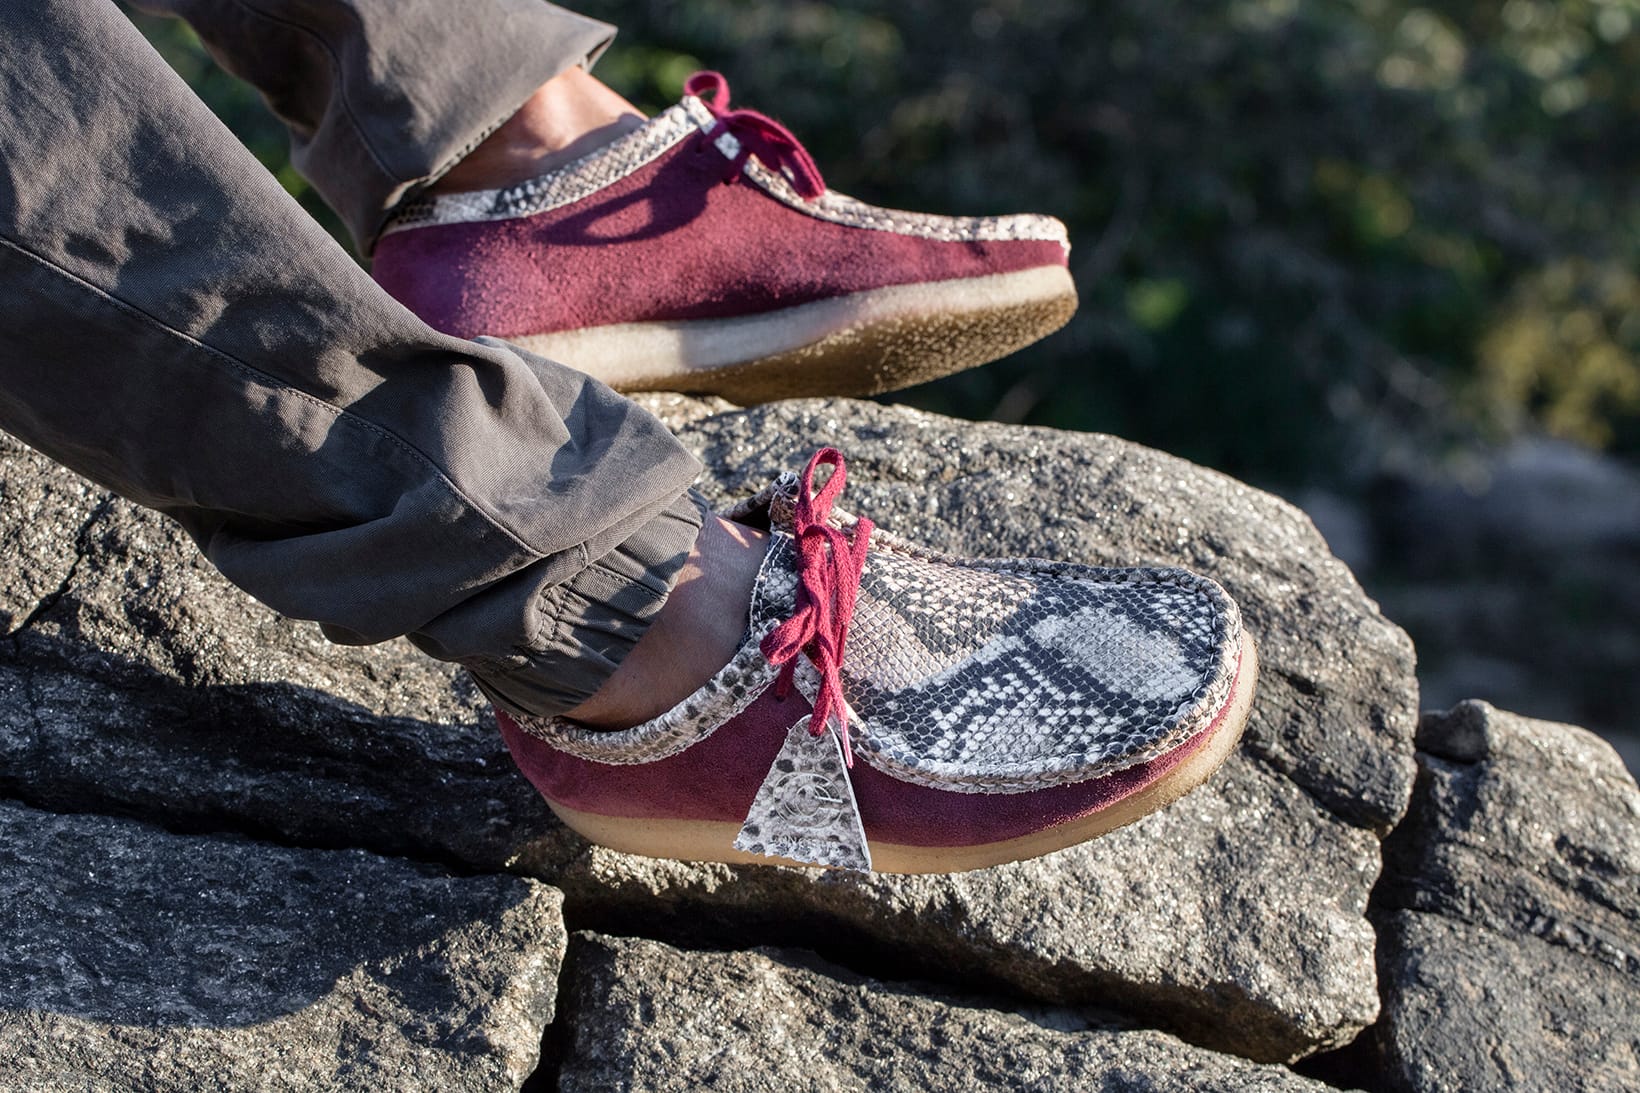 Concepts x Clarks Wallabee Moc in Snakeskin & Burgundy Suede 